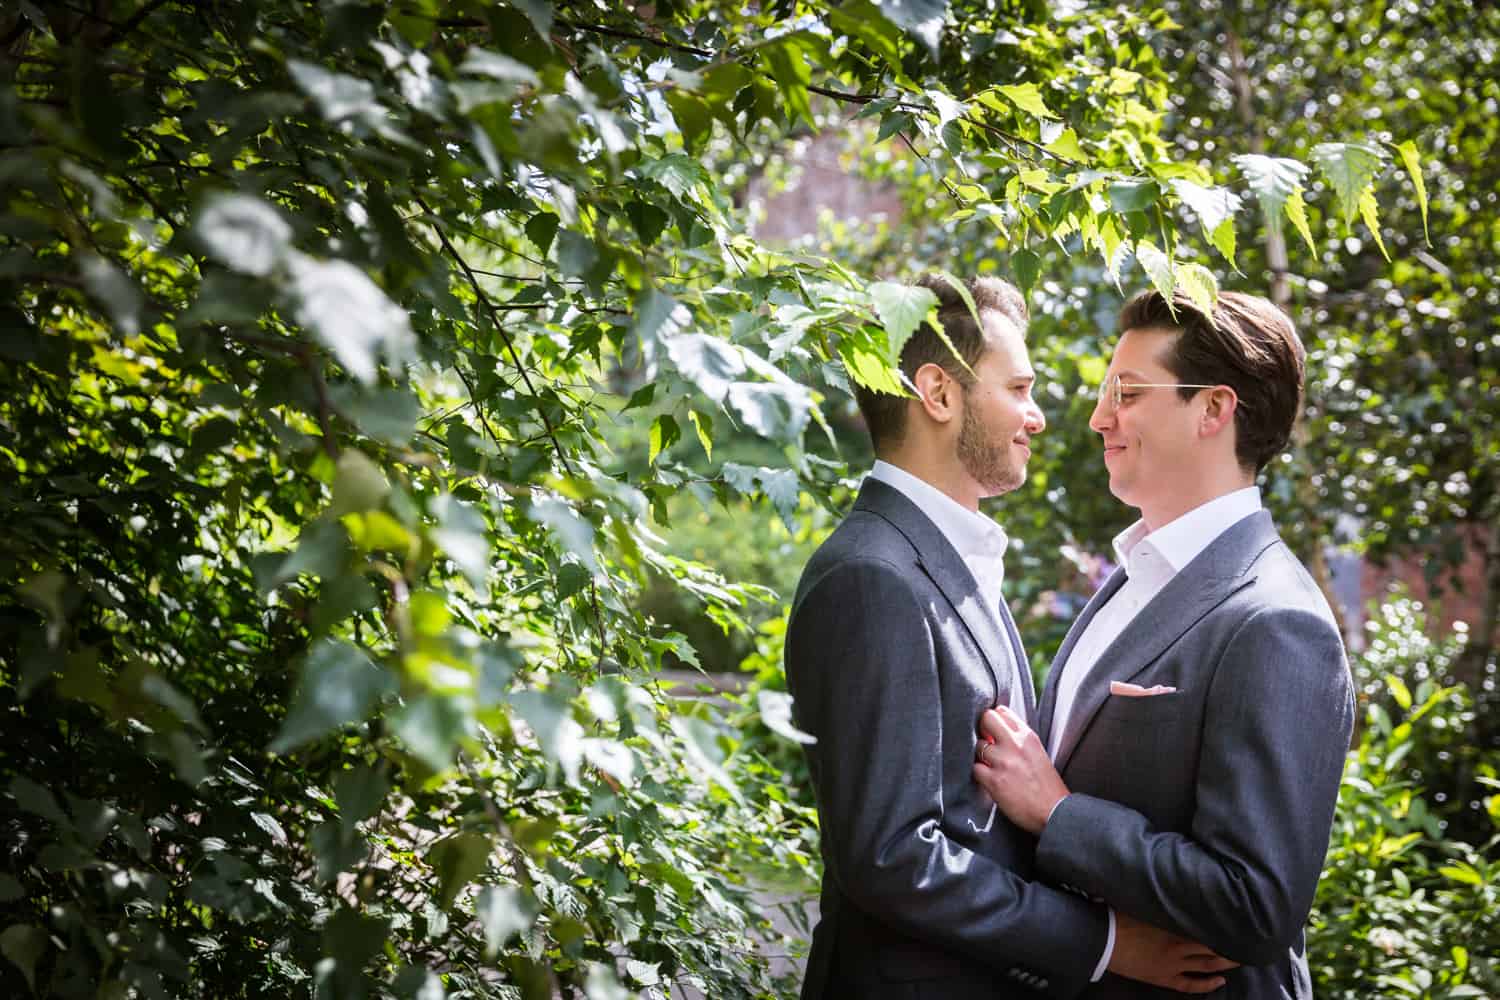 Greenpoint Loft wedding photos of two grooms in bushes at St. Ann's Warehouse